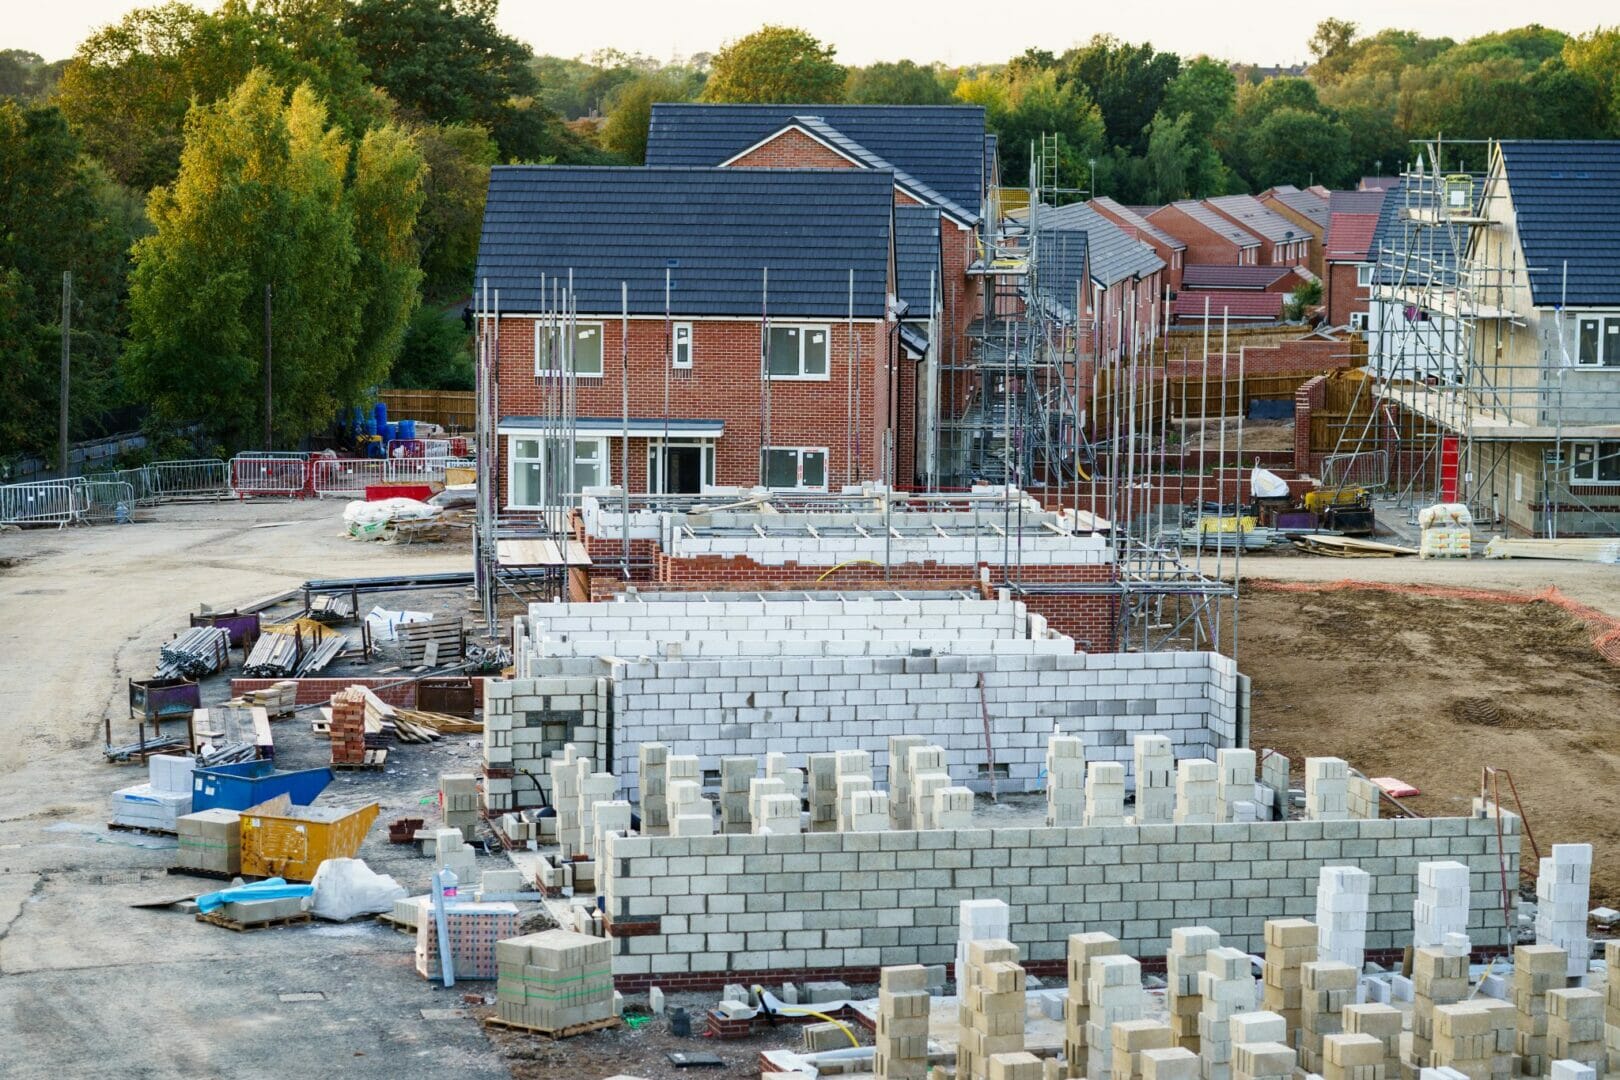 New-Build Checklist for Housing Developers